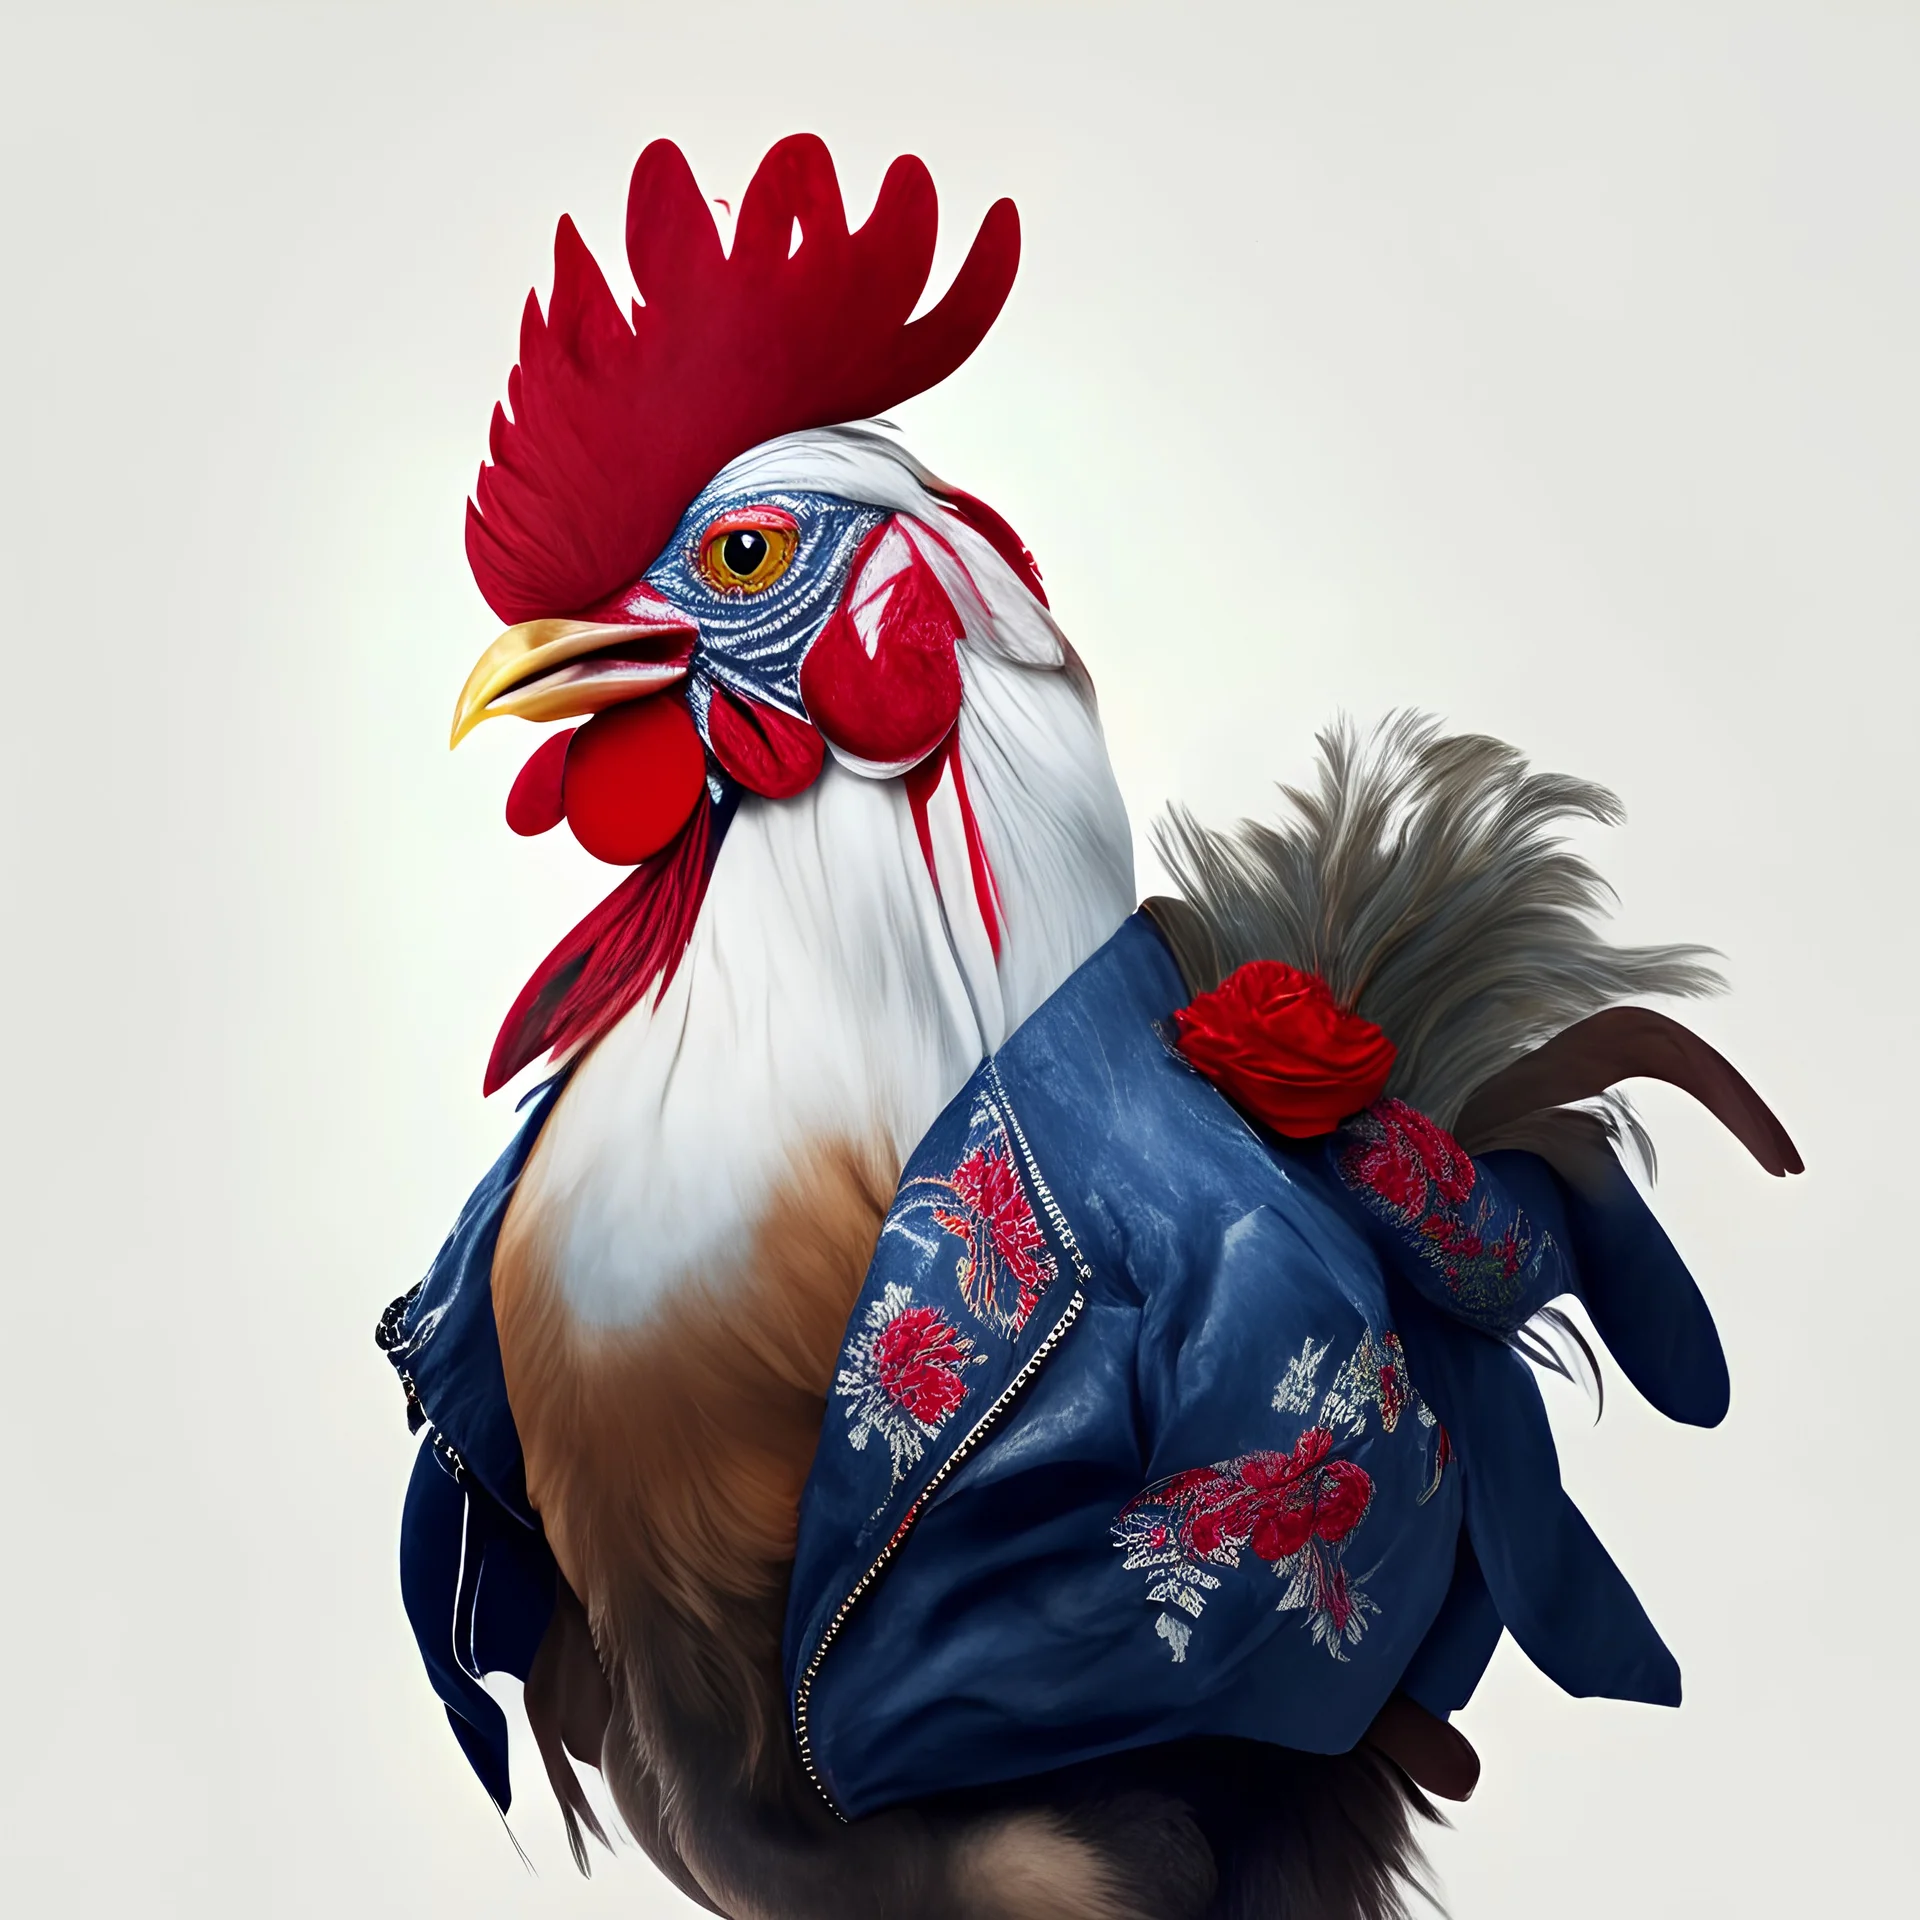 Cute rooster in a hat and jacket, gives a bouquet of red roses,